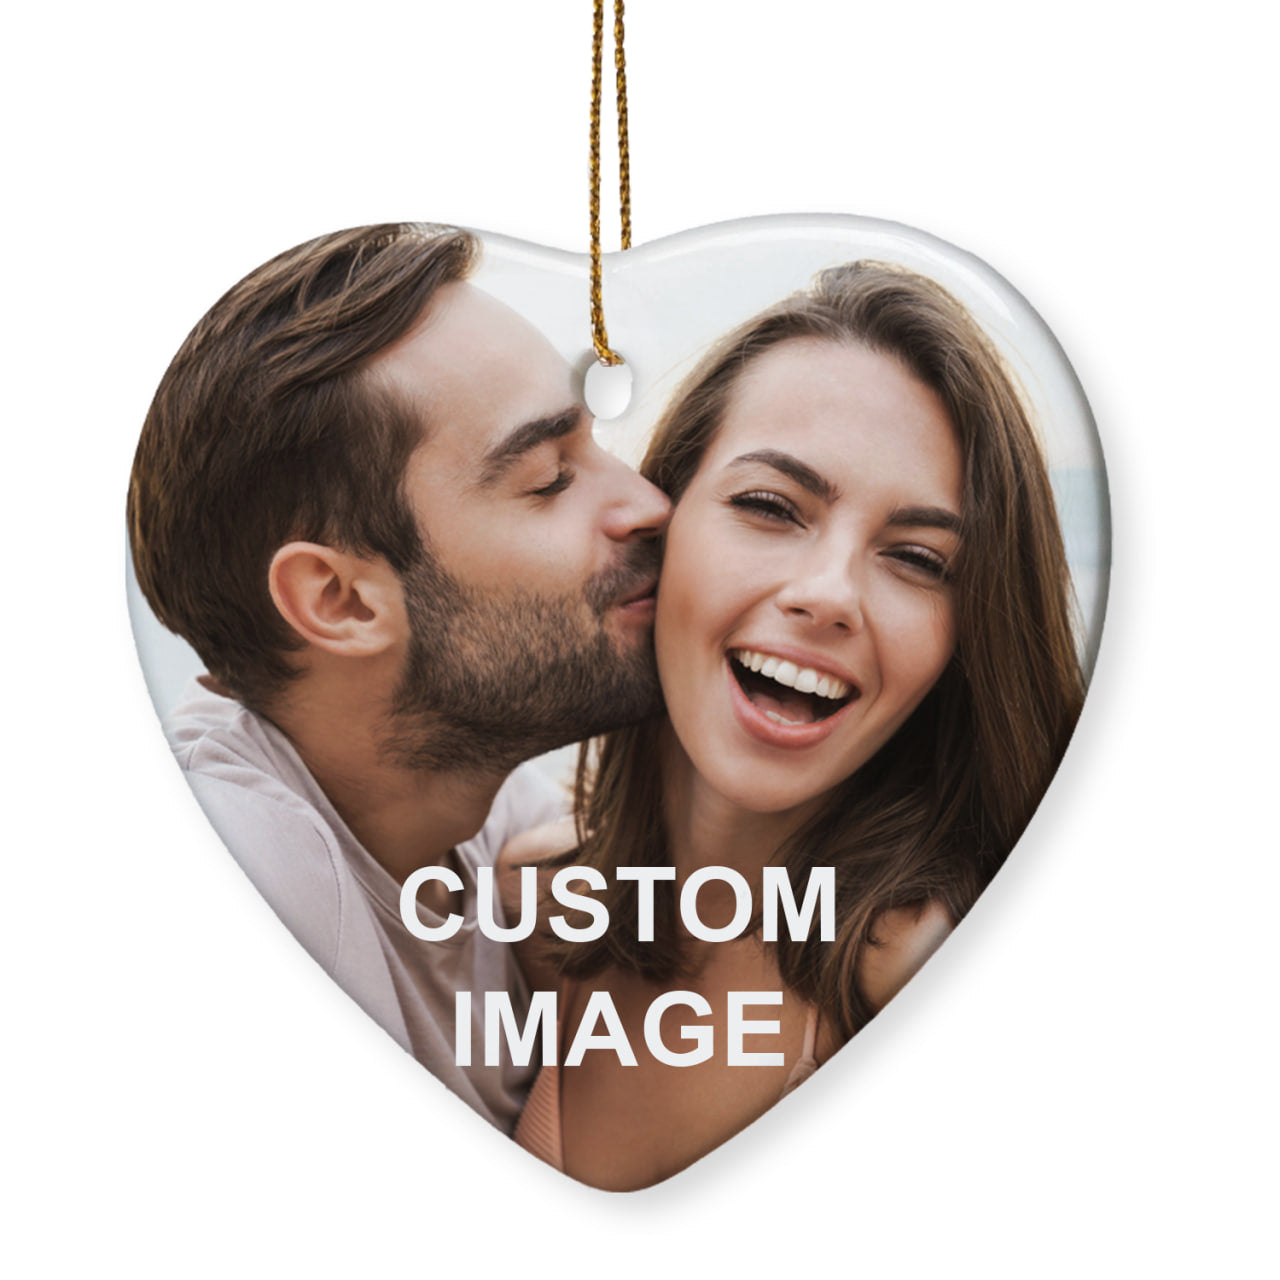 Custom Car Rear View Mirror Hanging Ornament with Photo - Personalized Ceramic Picture Car Pendant Decor